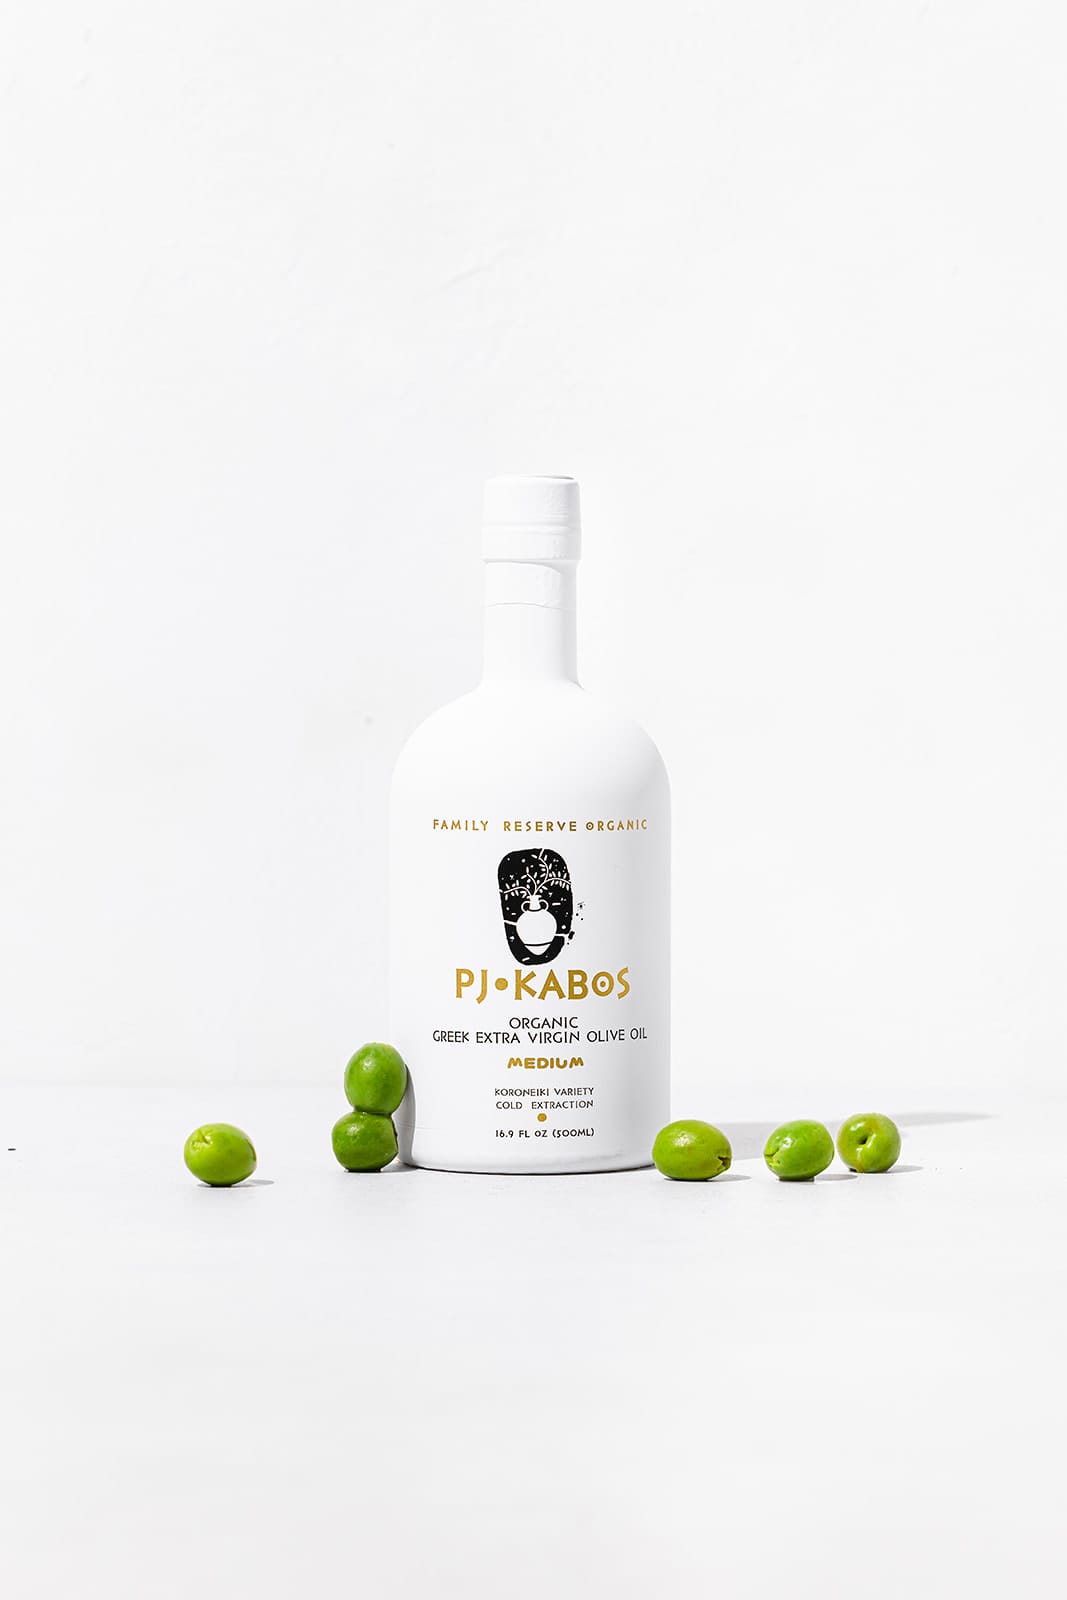 A white bottle of PJ Kabos high-phenolic medium taste intensity and organic extra virgin olive oil with olives scattered around it.